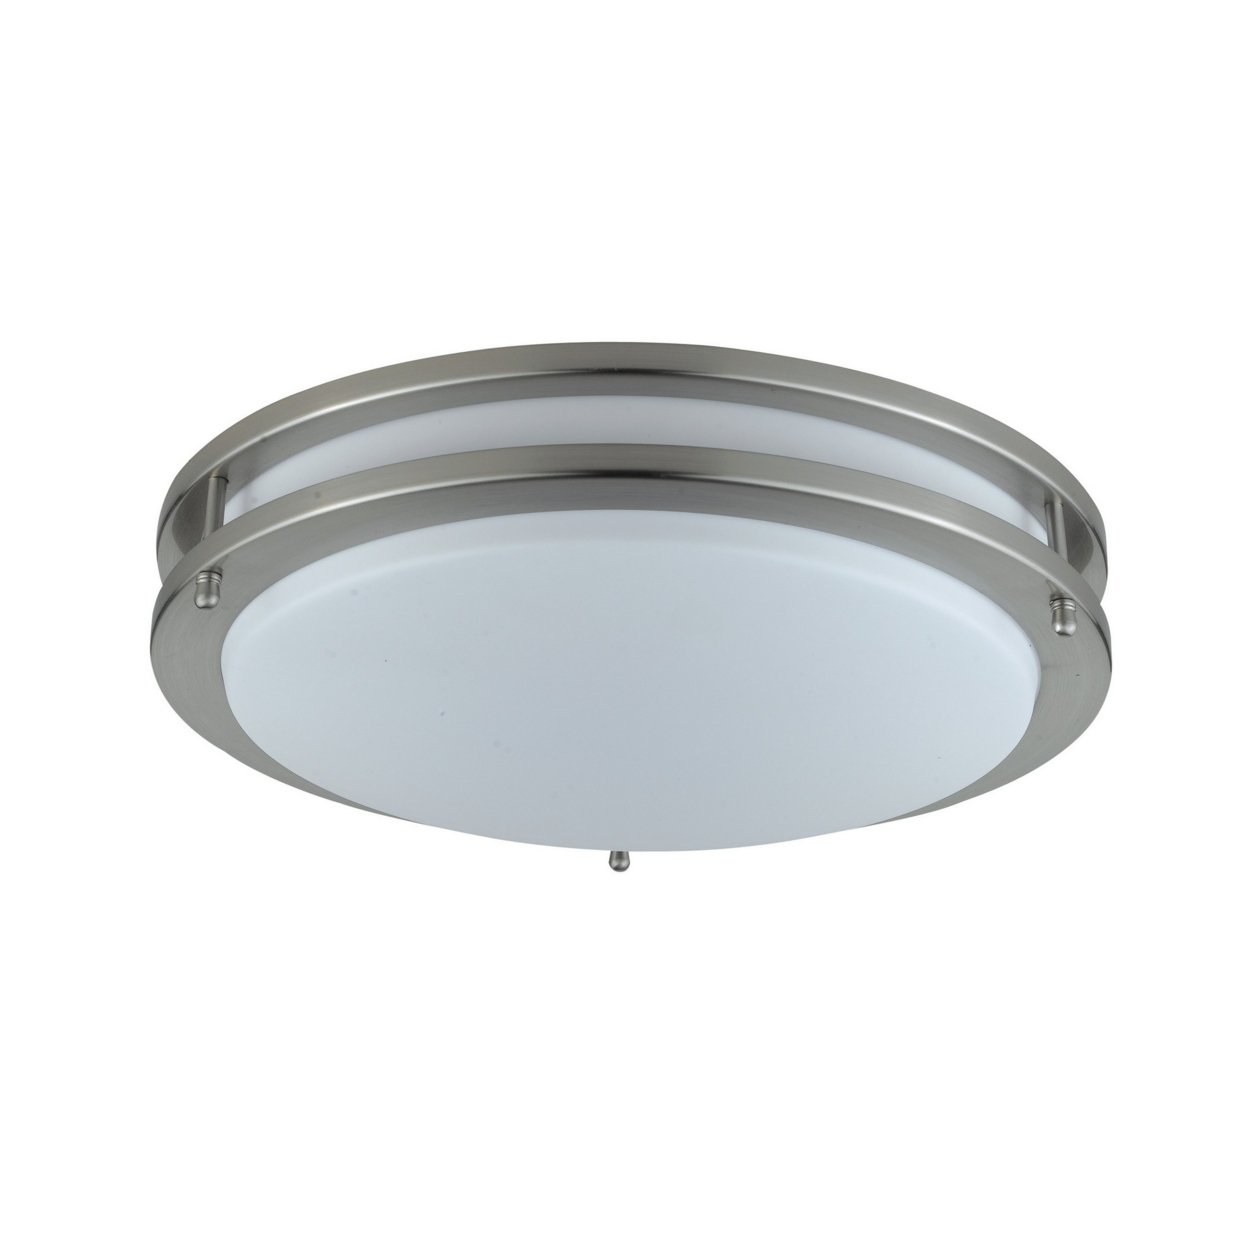 14 Inch Modern Ceiling Lamp With Frosted Acrylic Plate, Steel Trim, White- Saltoro Sherpi